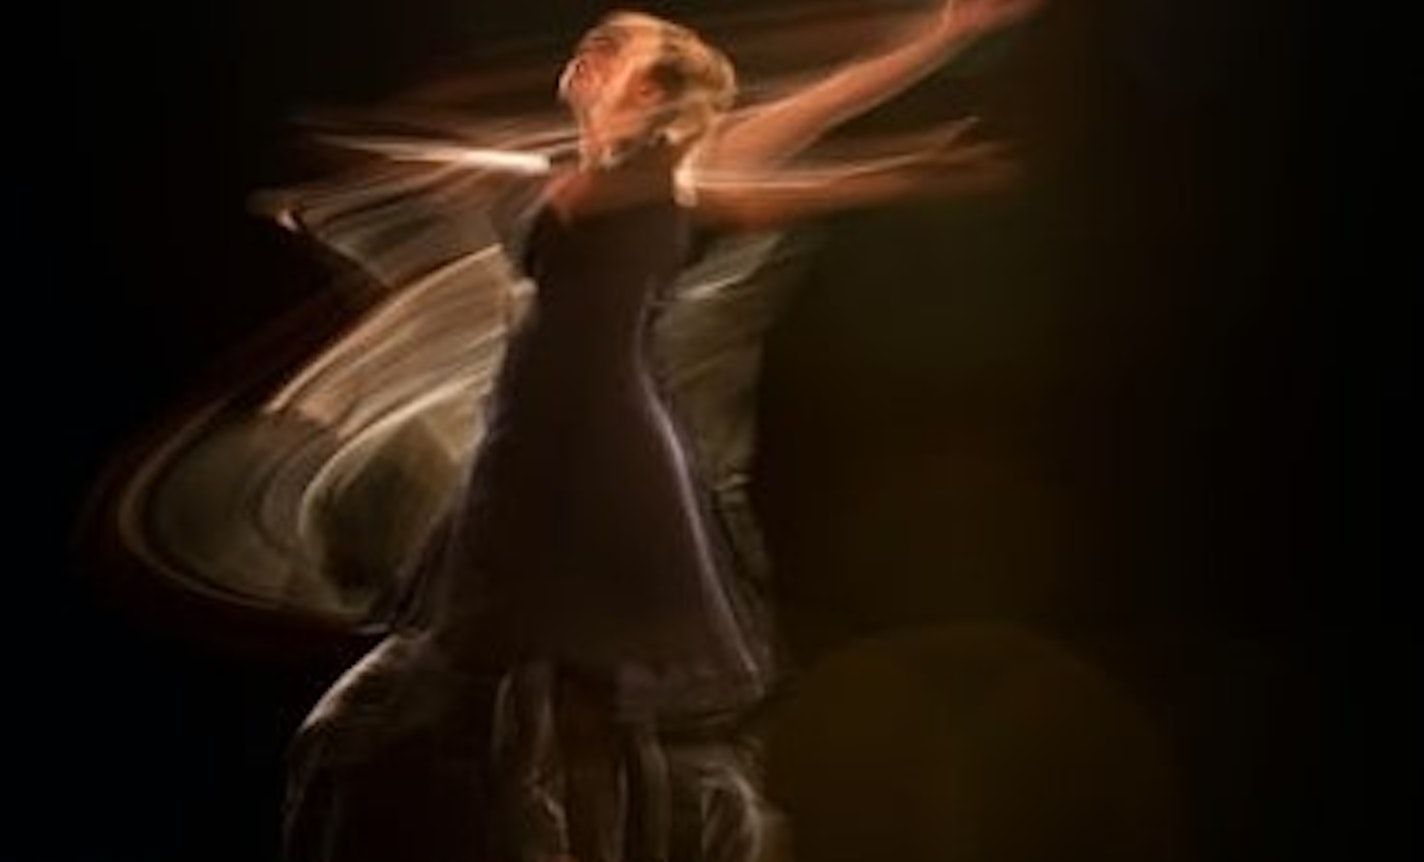 Honoring All Life's Experiences: A Dance Meditation